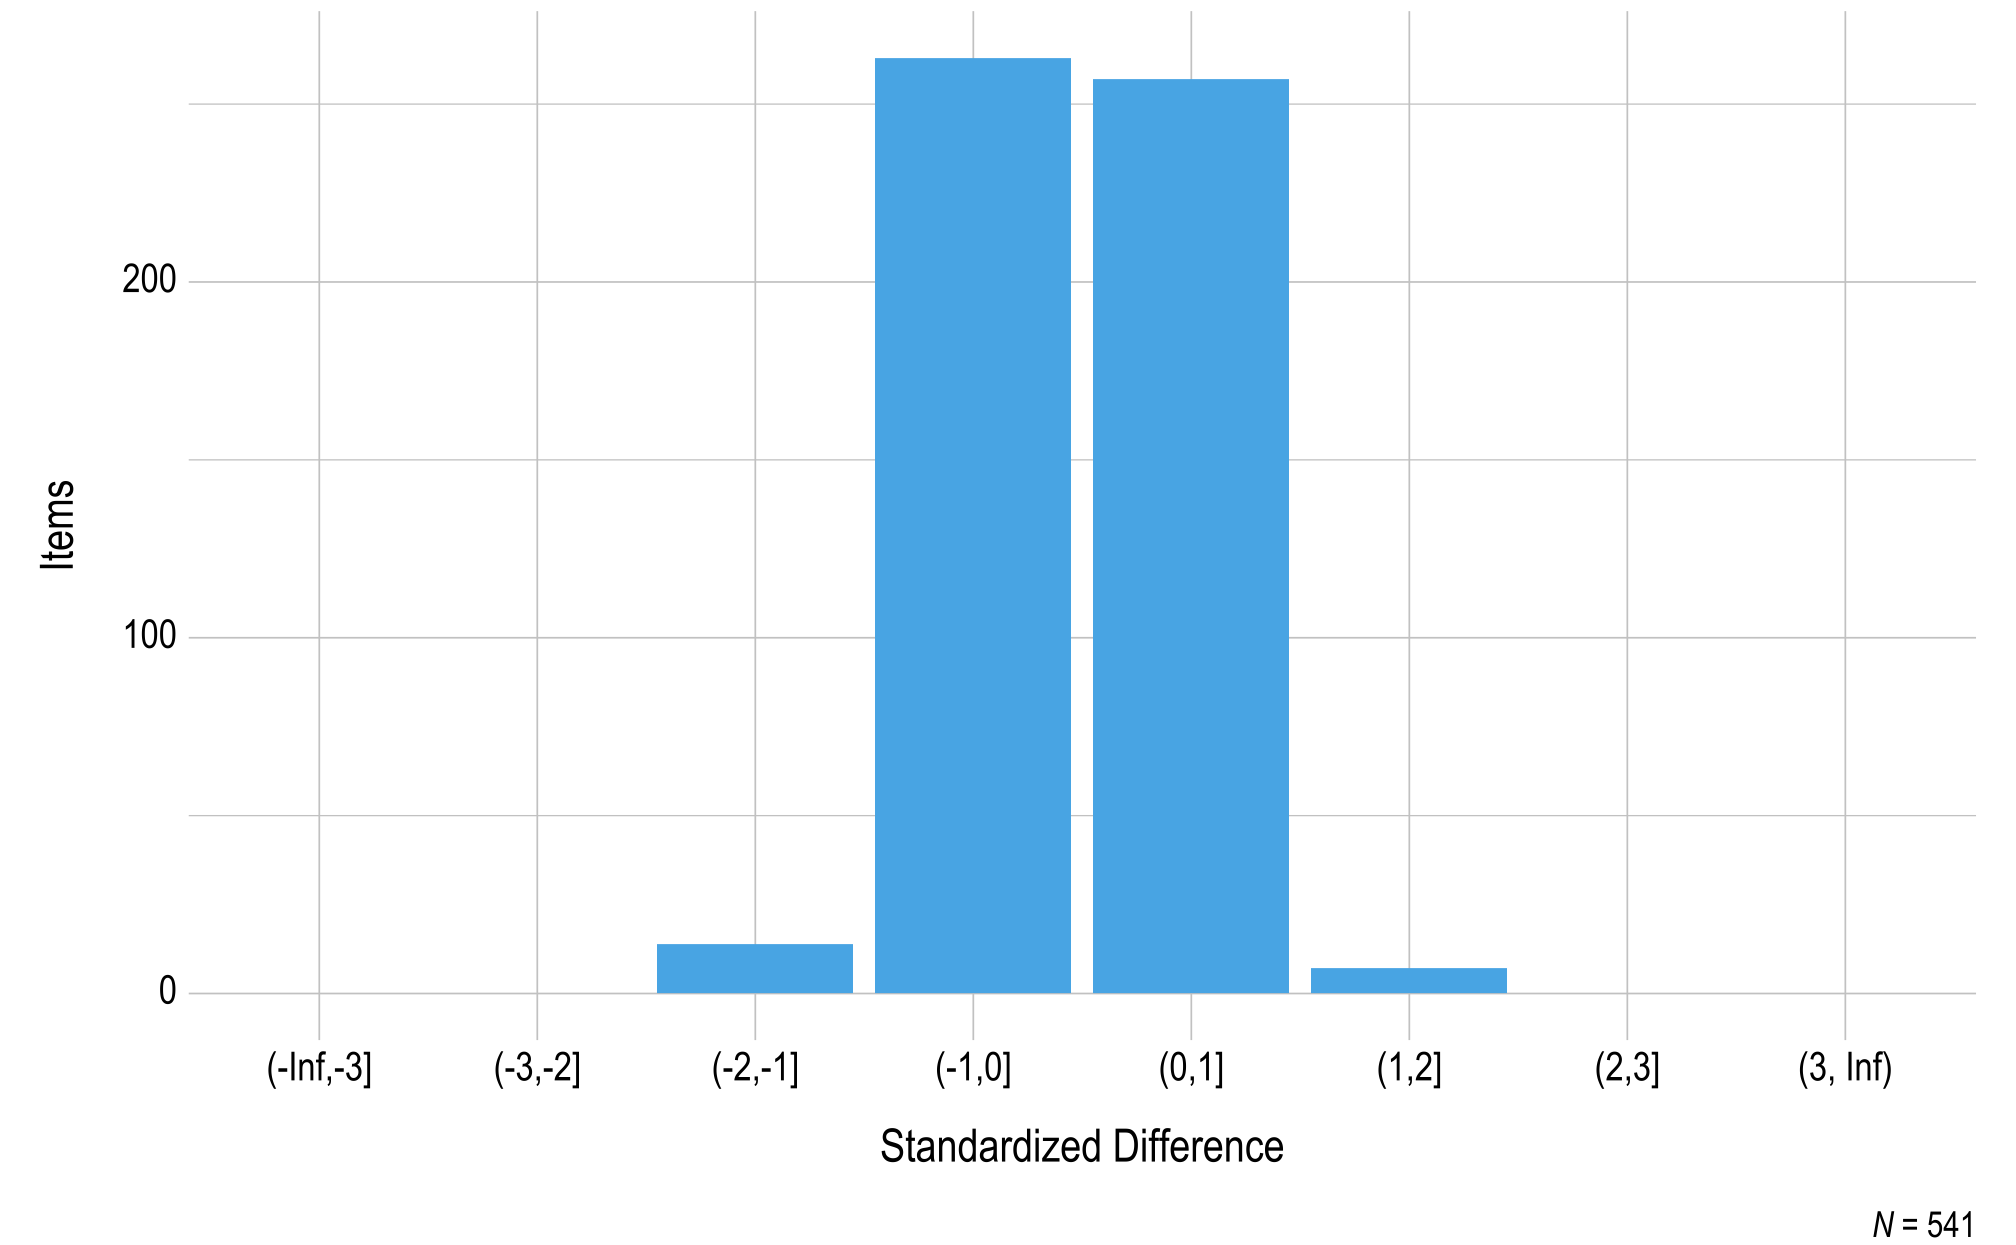 This figure contains a histogram displaying standardized difference on the x-axis and the number of science operational items on the y-axis.